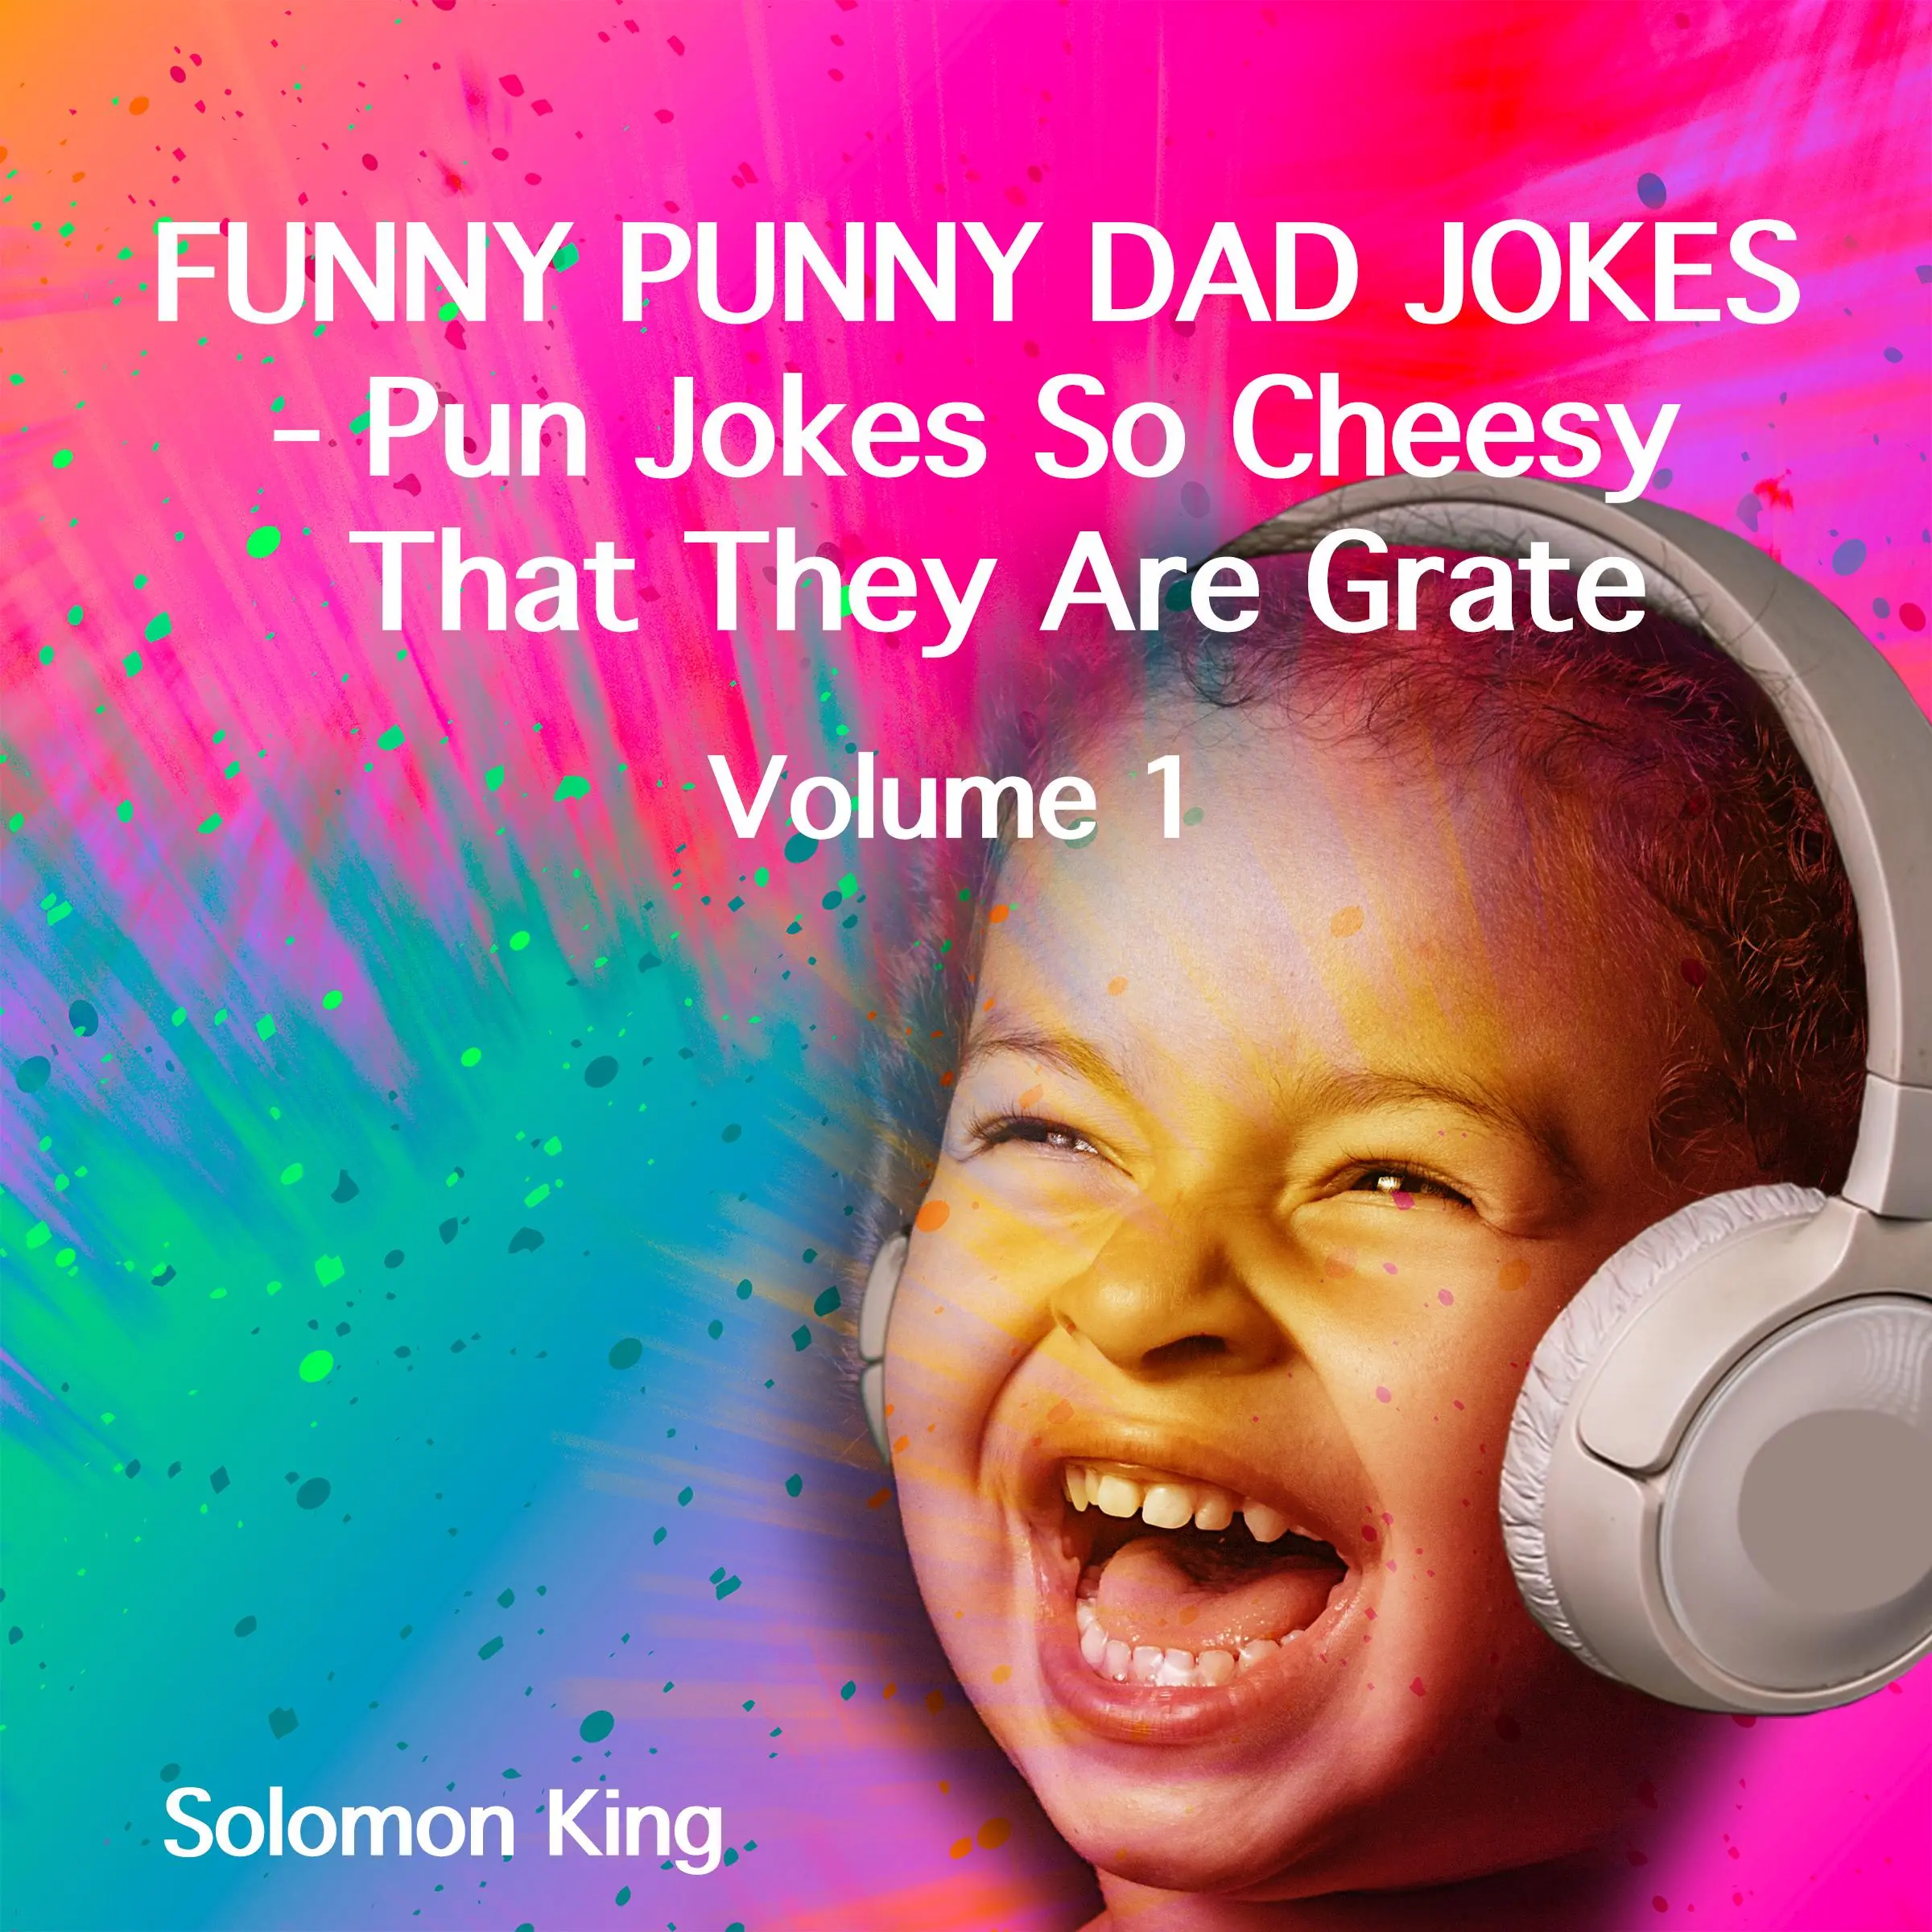 Funny Punny Dad Jokes - Pun Jokes So Cheesy That They Are Grate. Volume 1. Audiobook by Solomon King